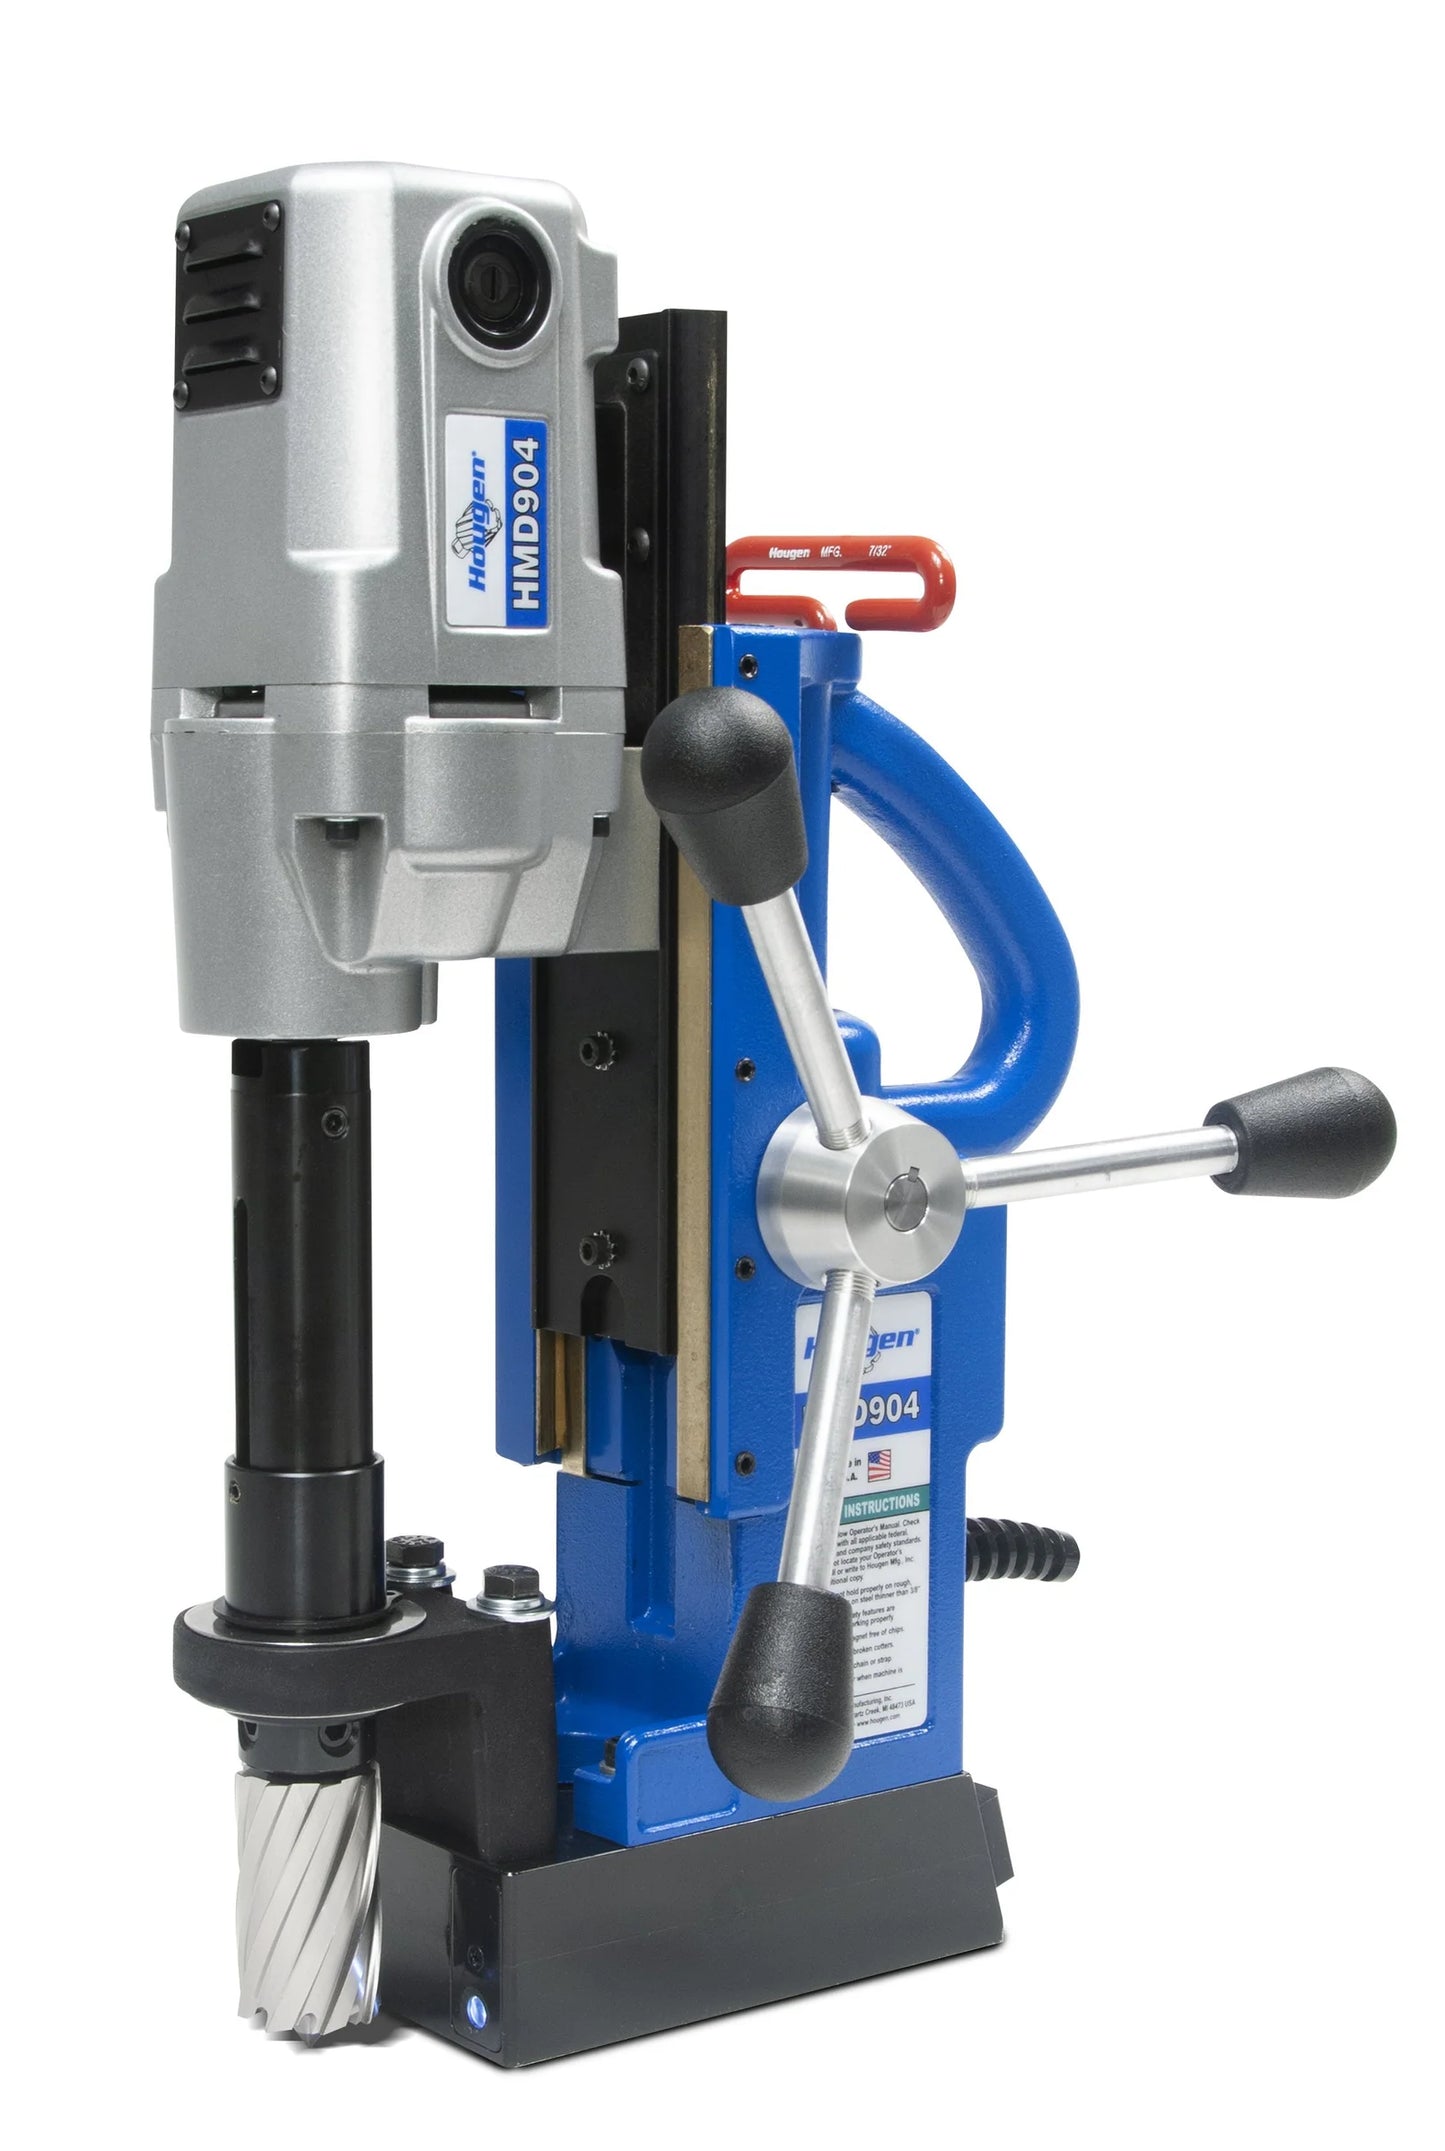 Hougen HMD904 Magnetic Drill 115V (Older Model) -  Reconditioned w/1 Year Operational Warranty